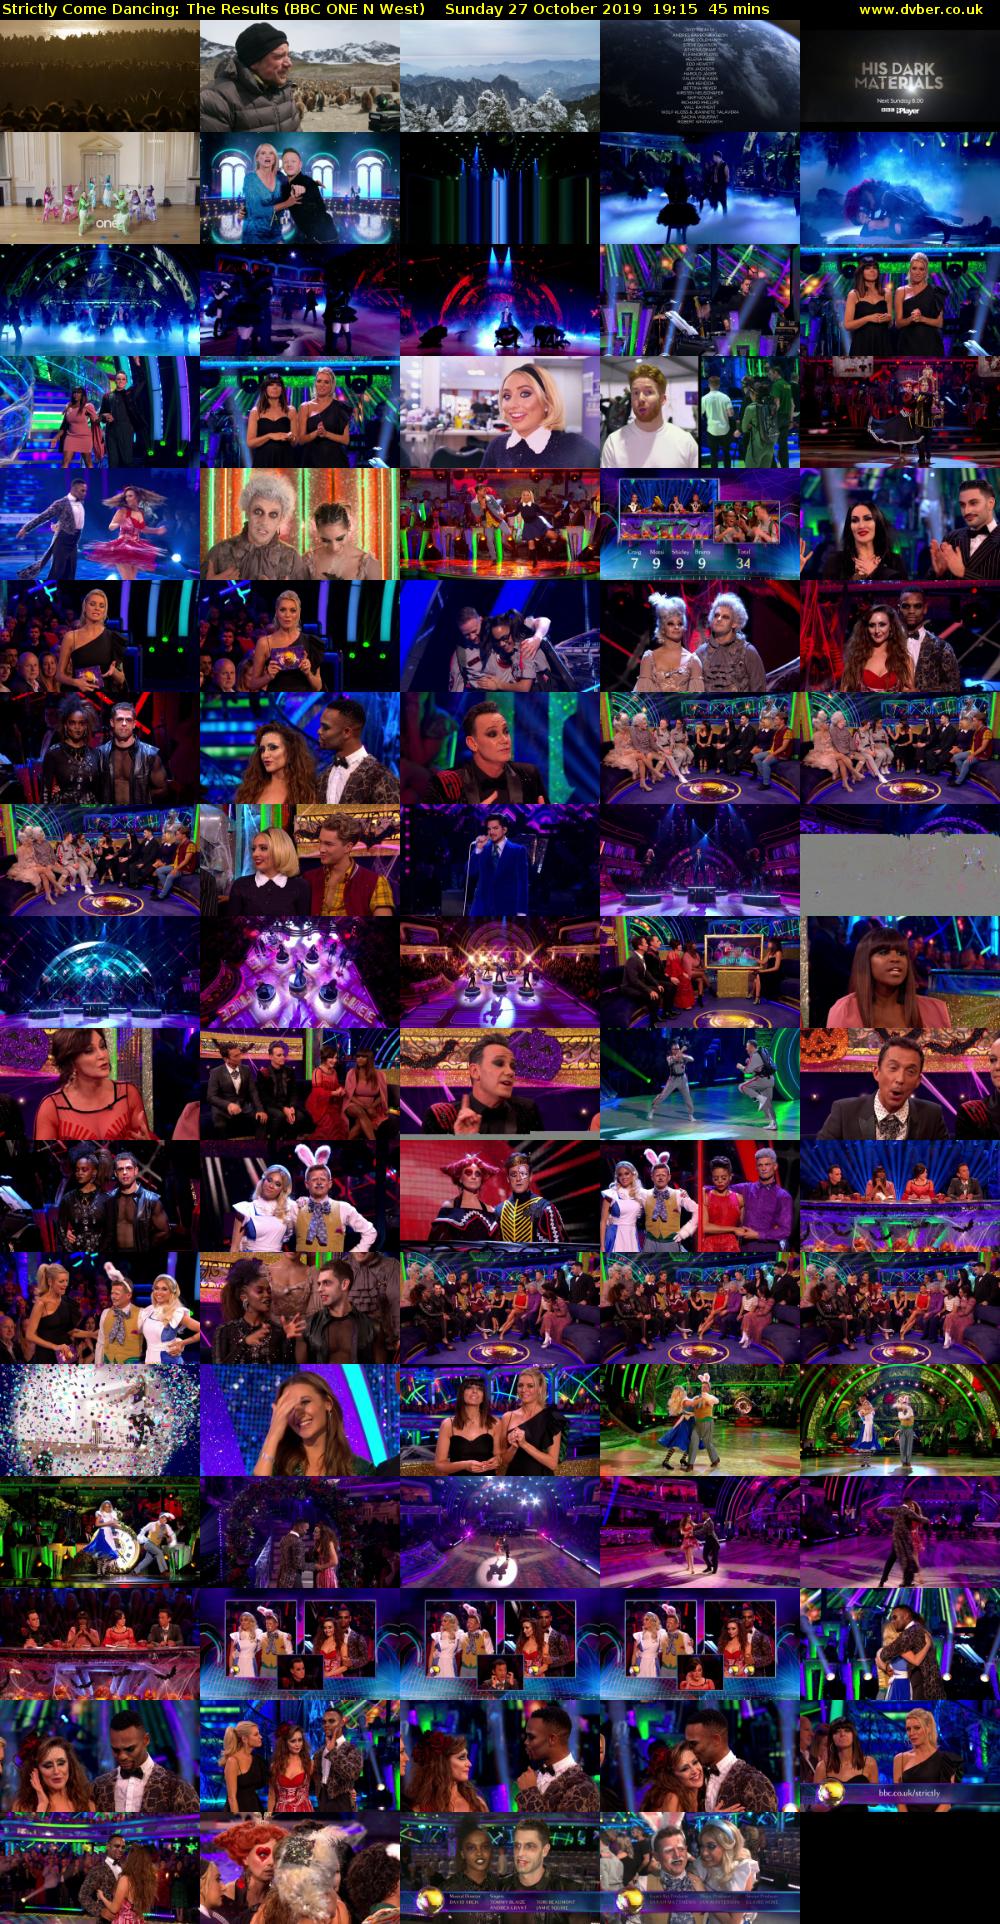 Strictly Come Dancing: The Results (BBC ONE N West) Sunday 27 October 2019 19:15 - 20:00